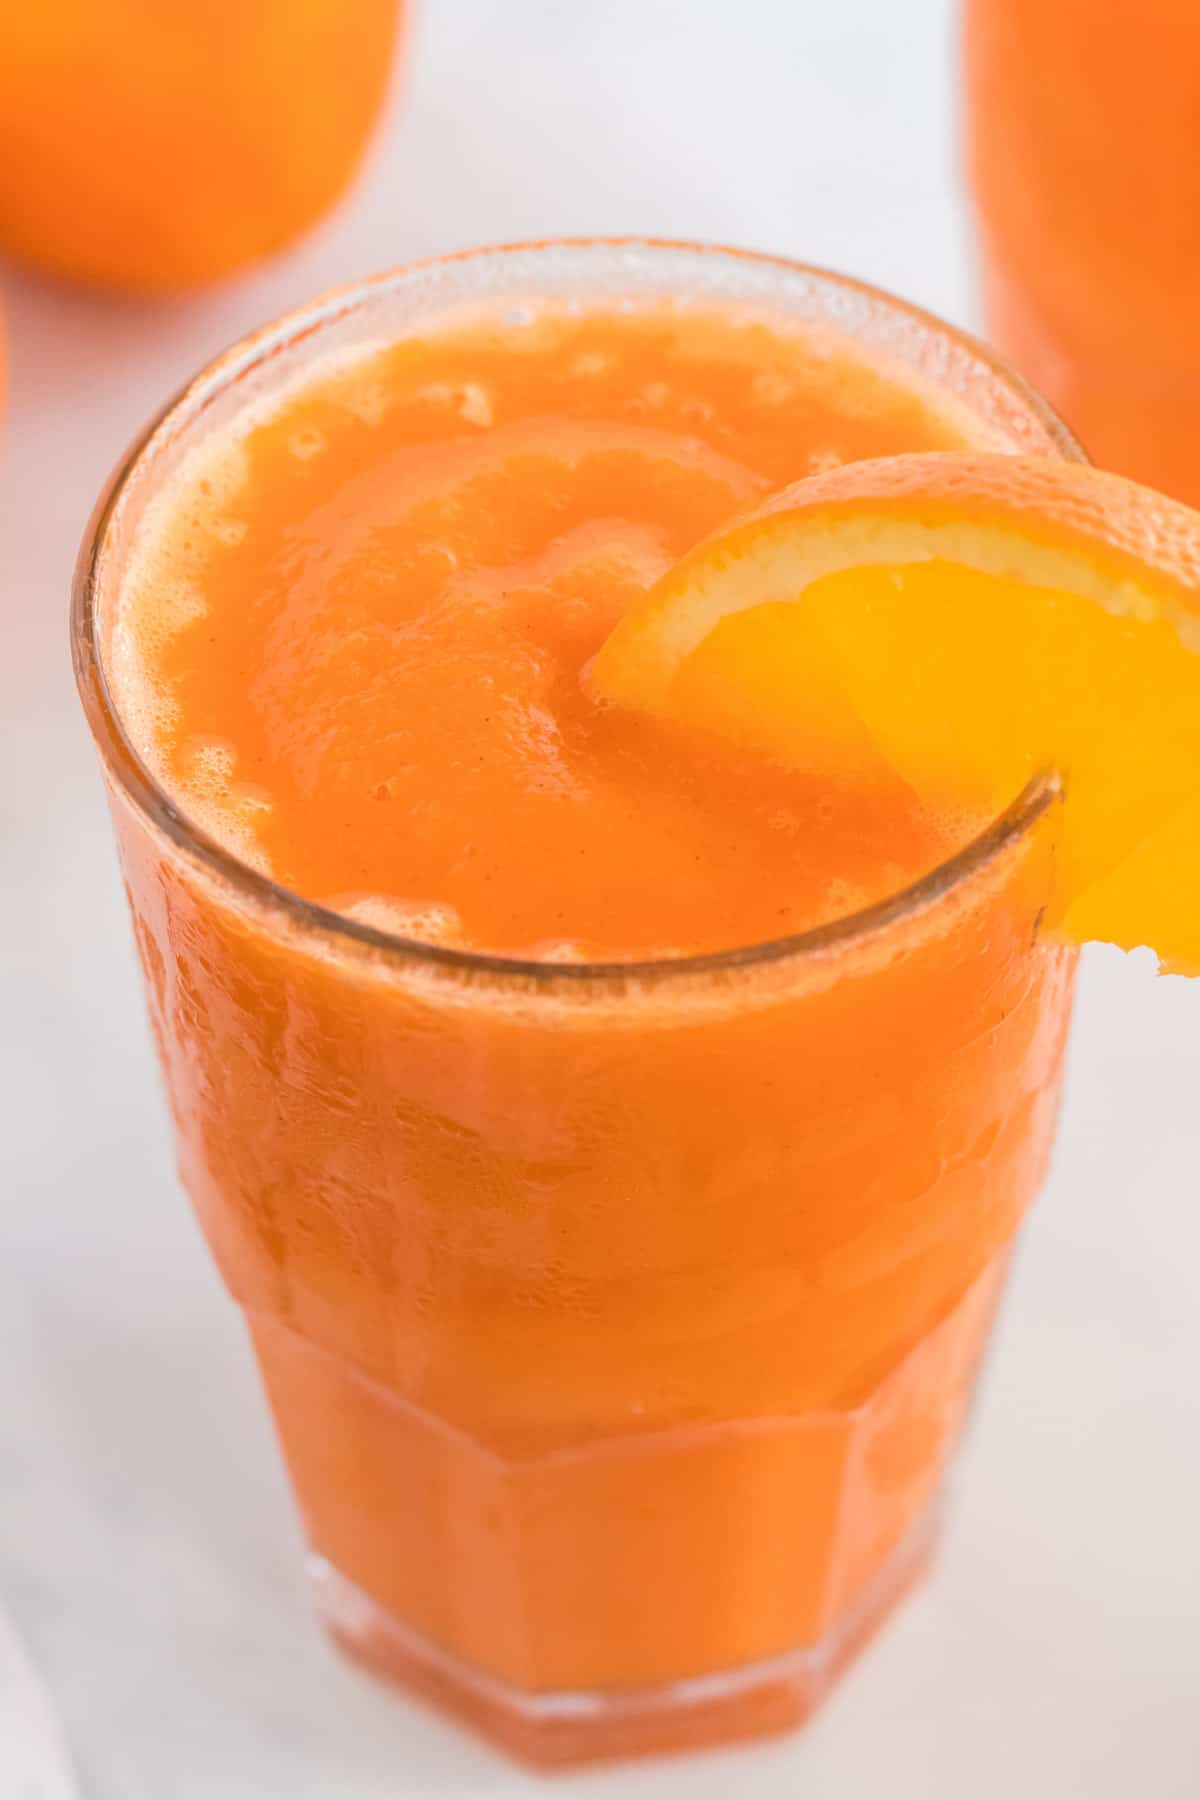 carrot smoothie in a glass with an orange slice on the rim